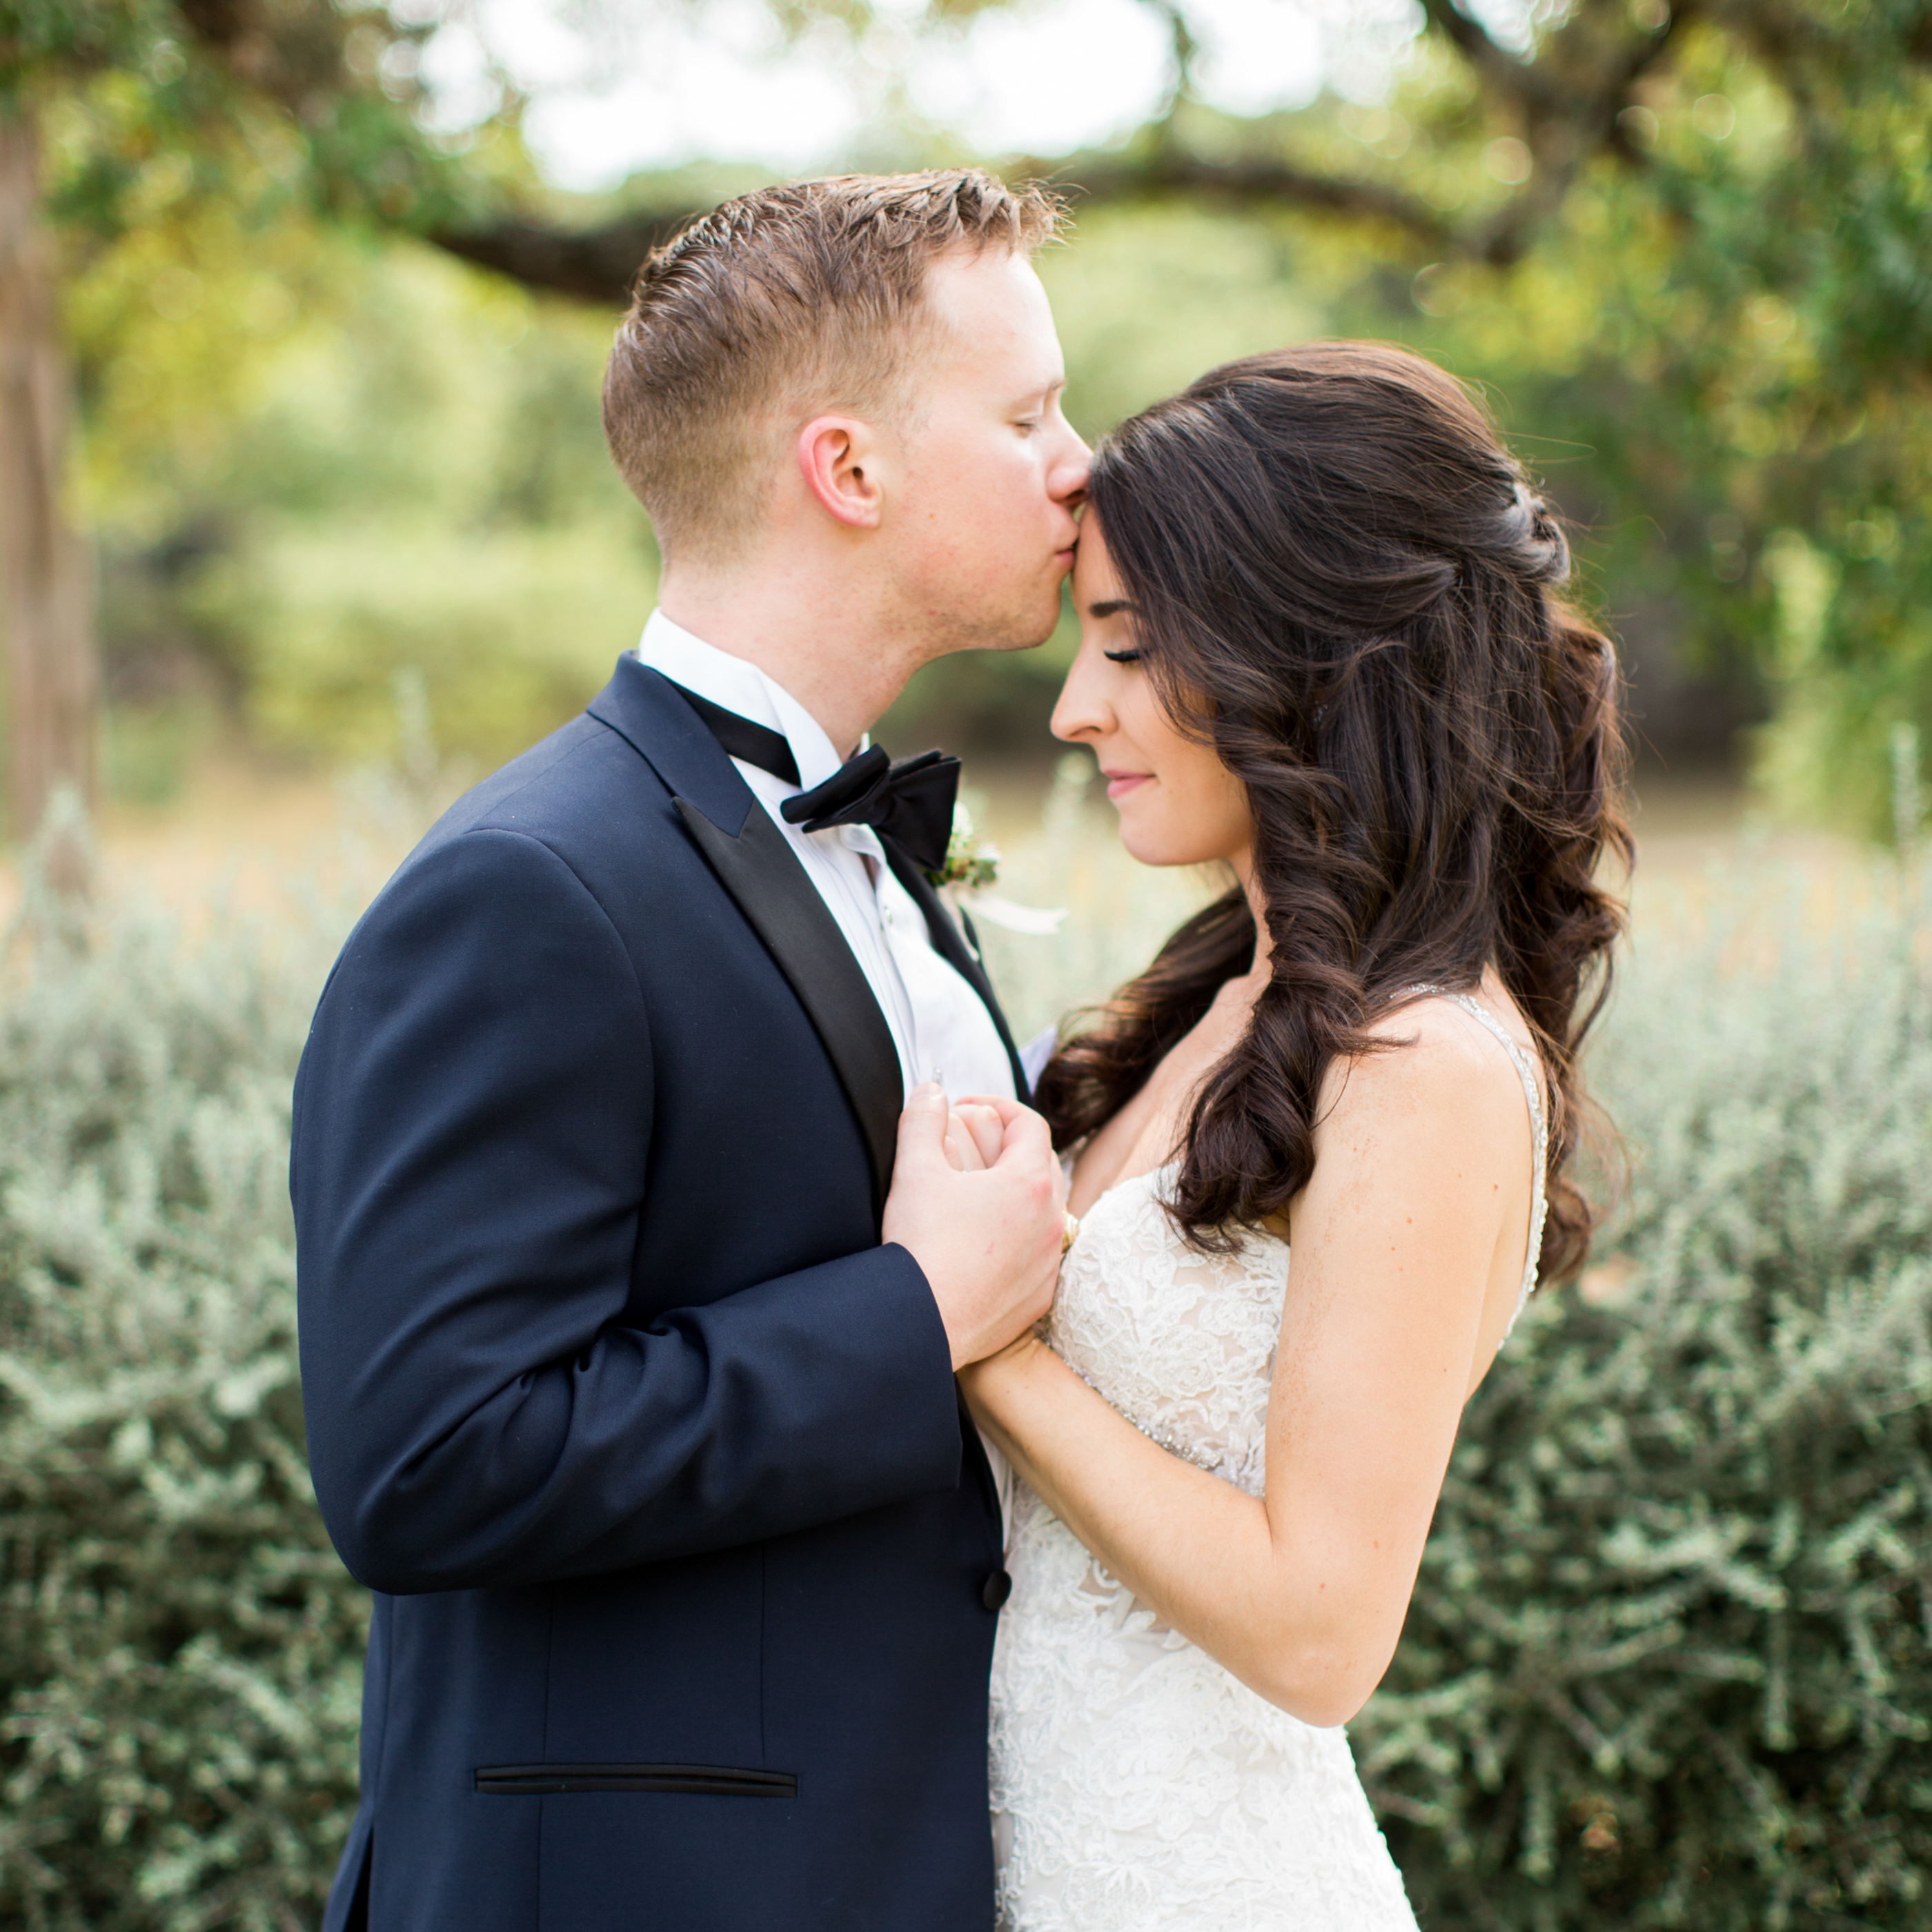 Blush and Gold Wedding at Kendall Plantation in Boerne, Texas